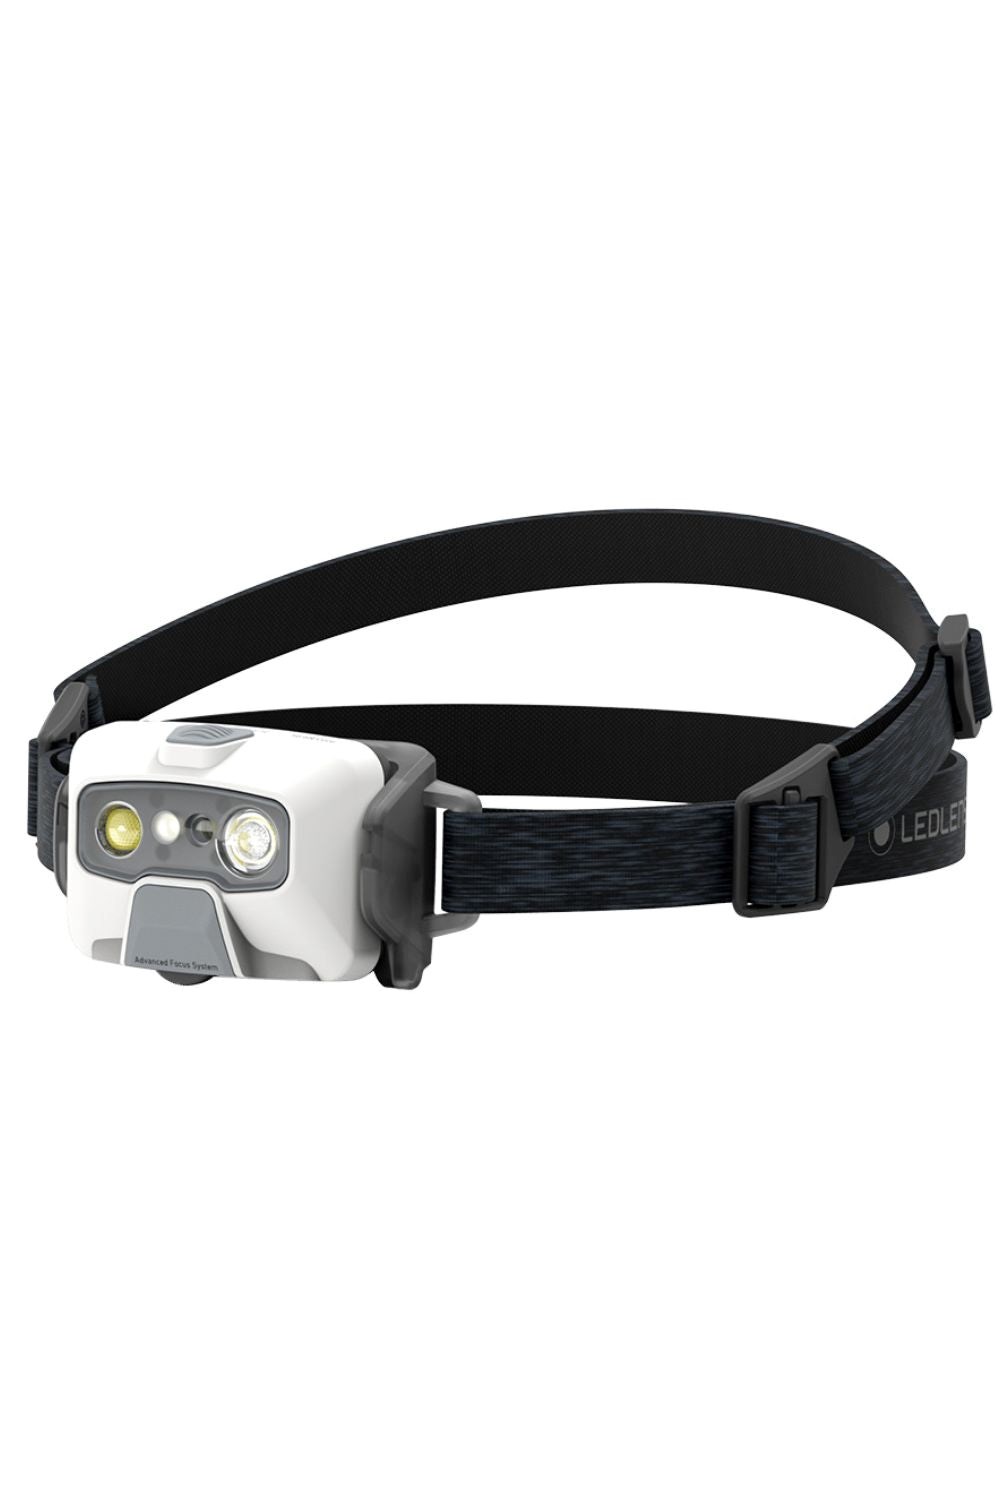 HF6R Core Rechargable 800lm LED Head Torch -